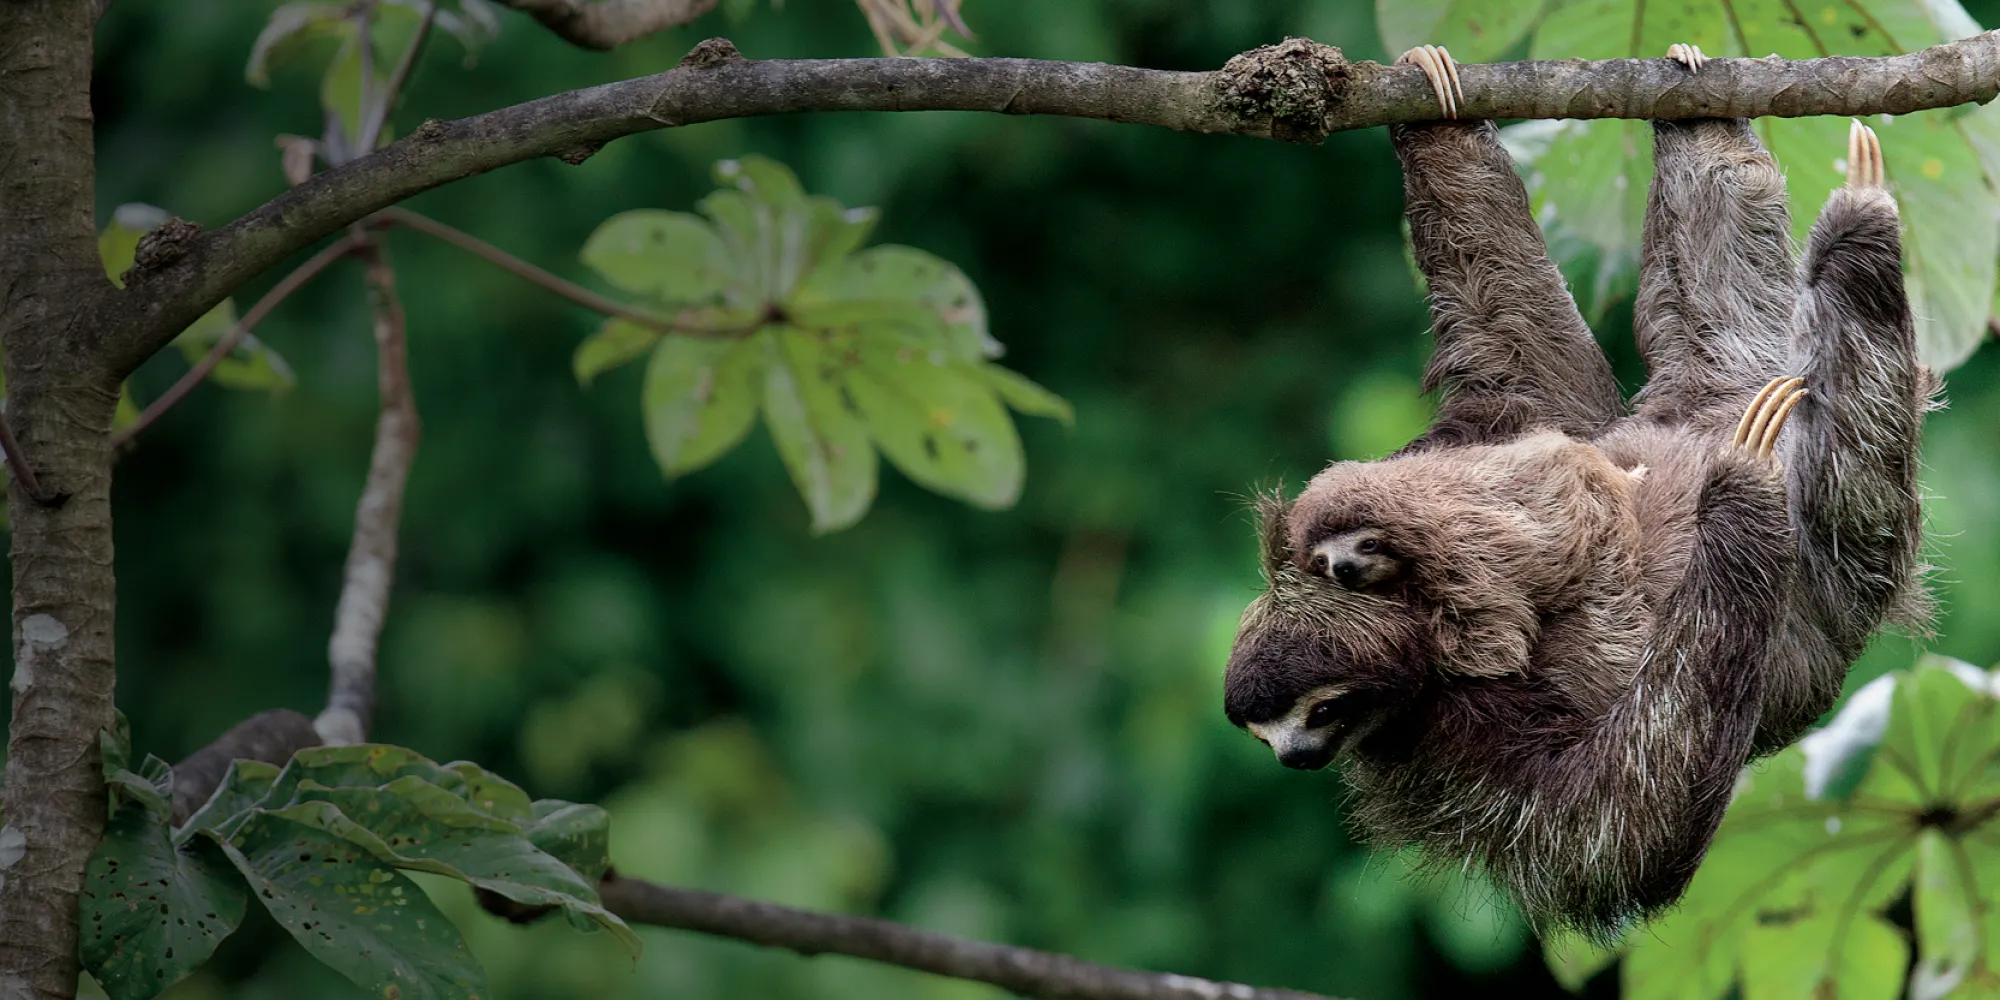 two sloths holding on a tree together with green leaves in back